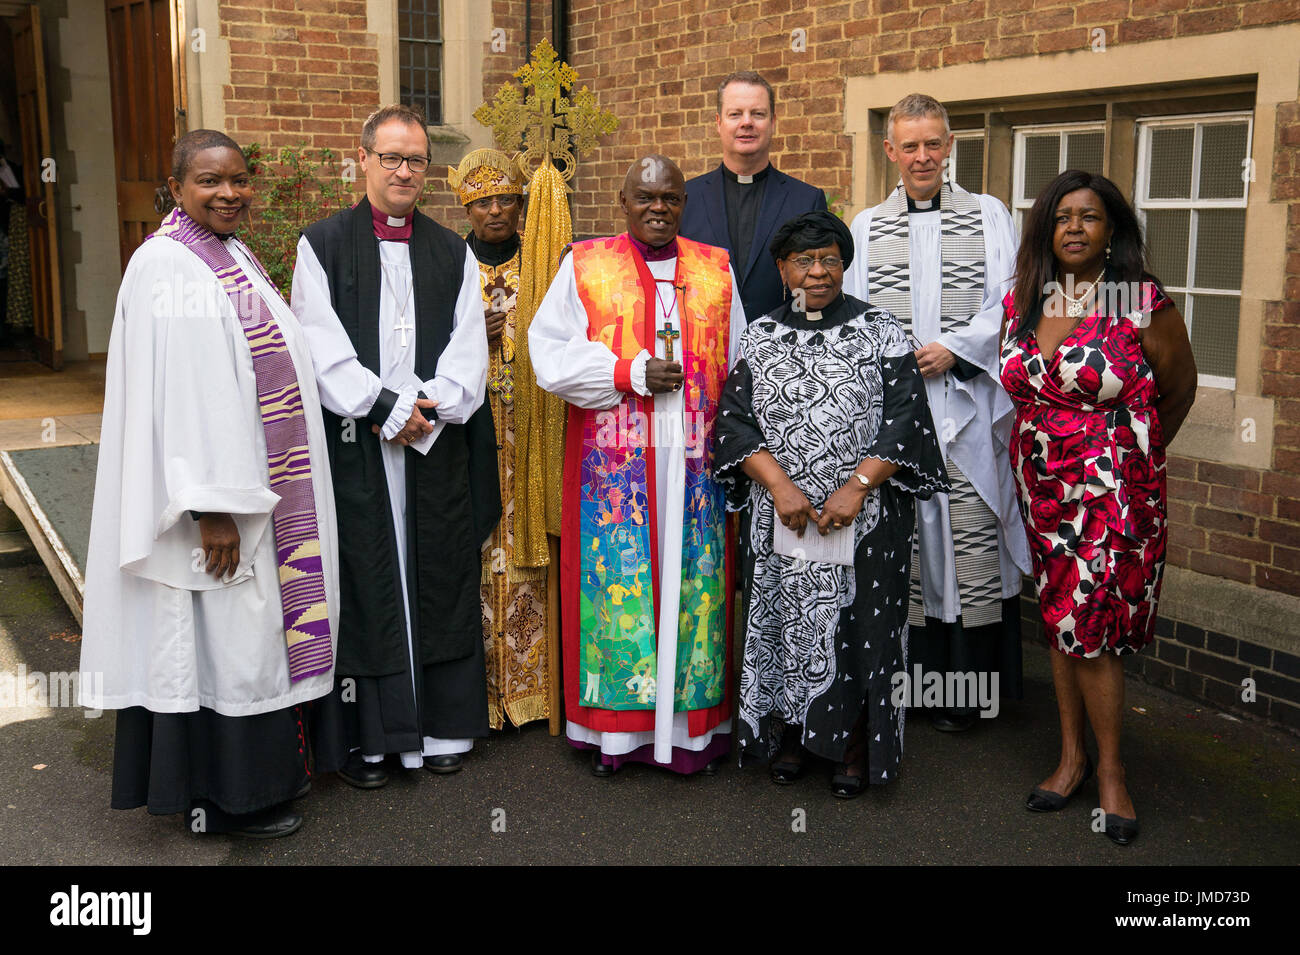 (left to right) Speaker's Chaplain Rev Preb Rose Hudson-Wilkin, Bishop of Kensington Rt Revd Graham Tomlin, Father Georgis Dimts of St Gabriel's Ethiopian Orthodox Church, Archbishop of York Dr John Sentamu, Vicar of St Helen's Church Steve Divall, Representative of the Ambassador of Gambia Rev Femi Cole-Njie, Chief of Staff to the Archbishop of York Malcolm MacNaughton and relative of Mary Mendy Clarie Mendy attend a memorial service for Mary Mendy, 54, Khadija Saye, 24, Berkti Haftom, 29, Beruk Haftom,12 and Isaac (Welde Mariam), 5, victims of the fire at Grenfell Tower, at St Helens Stock Photo